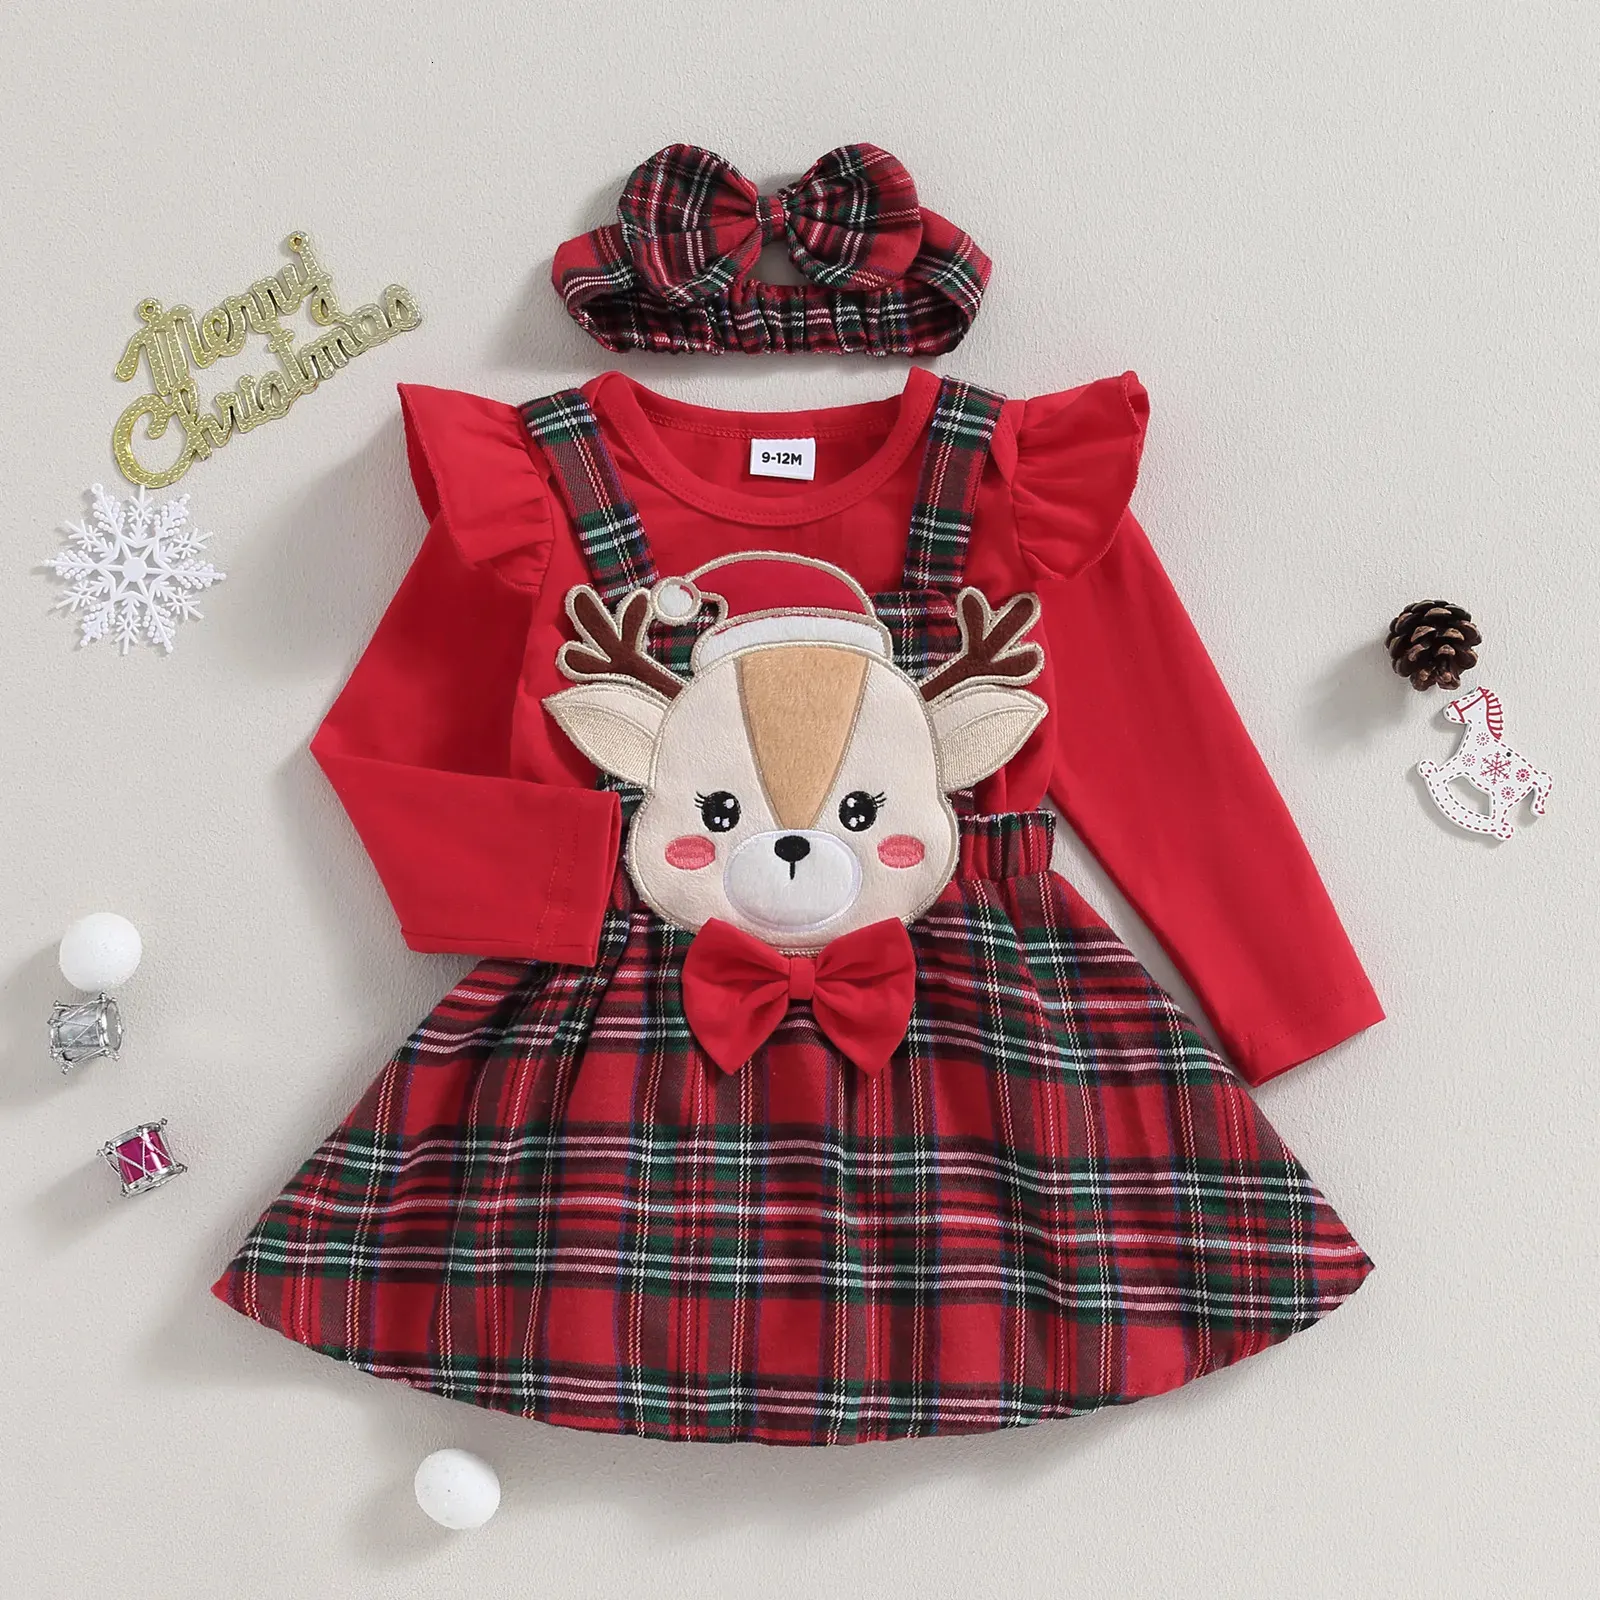 Clothing Sets ma baby 0 18M Christmas born Infant Baby Girl Clothes Knit Red Romper Deer Plaid Skirts Headban Xmas Outfits Costume D05 231012